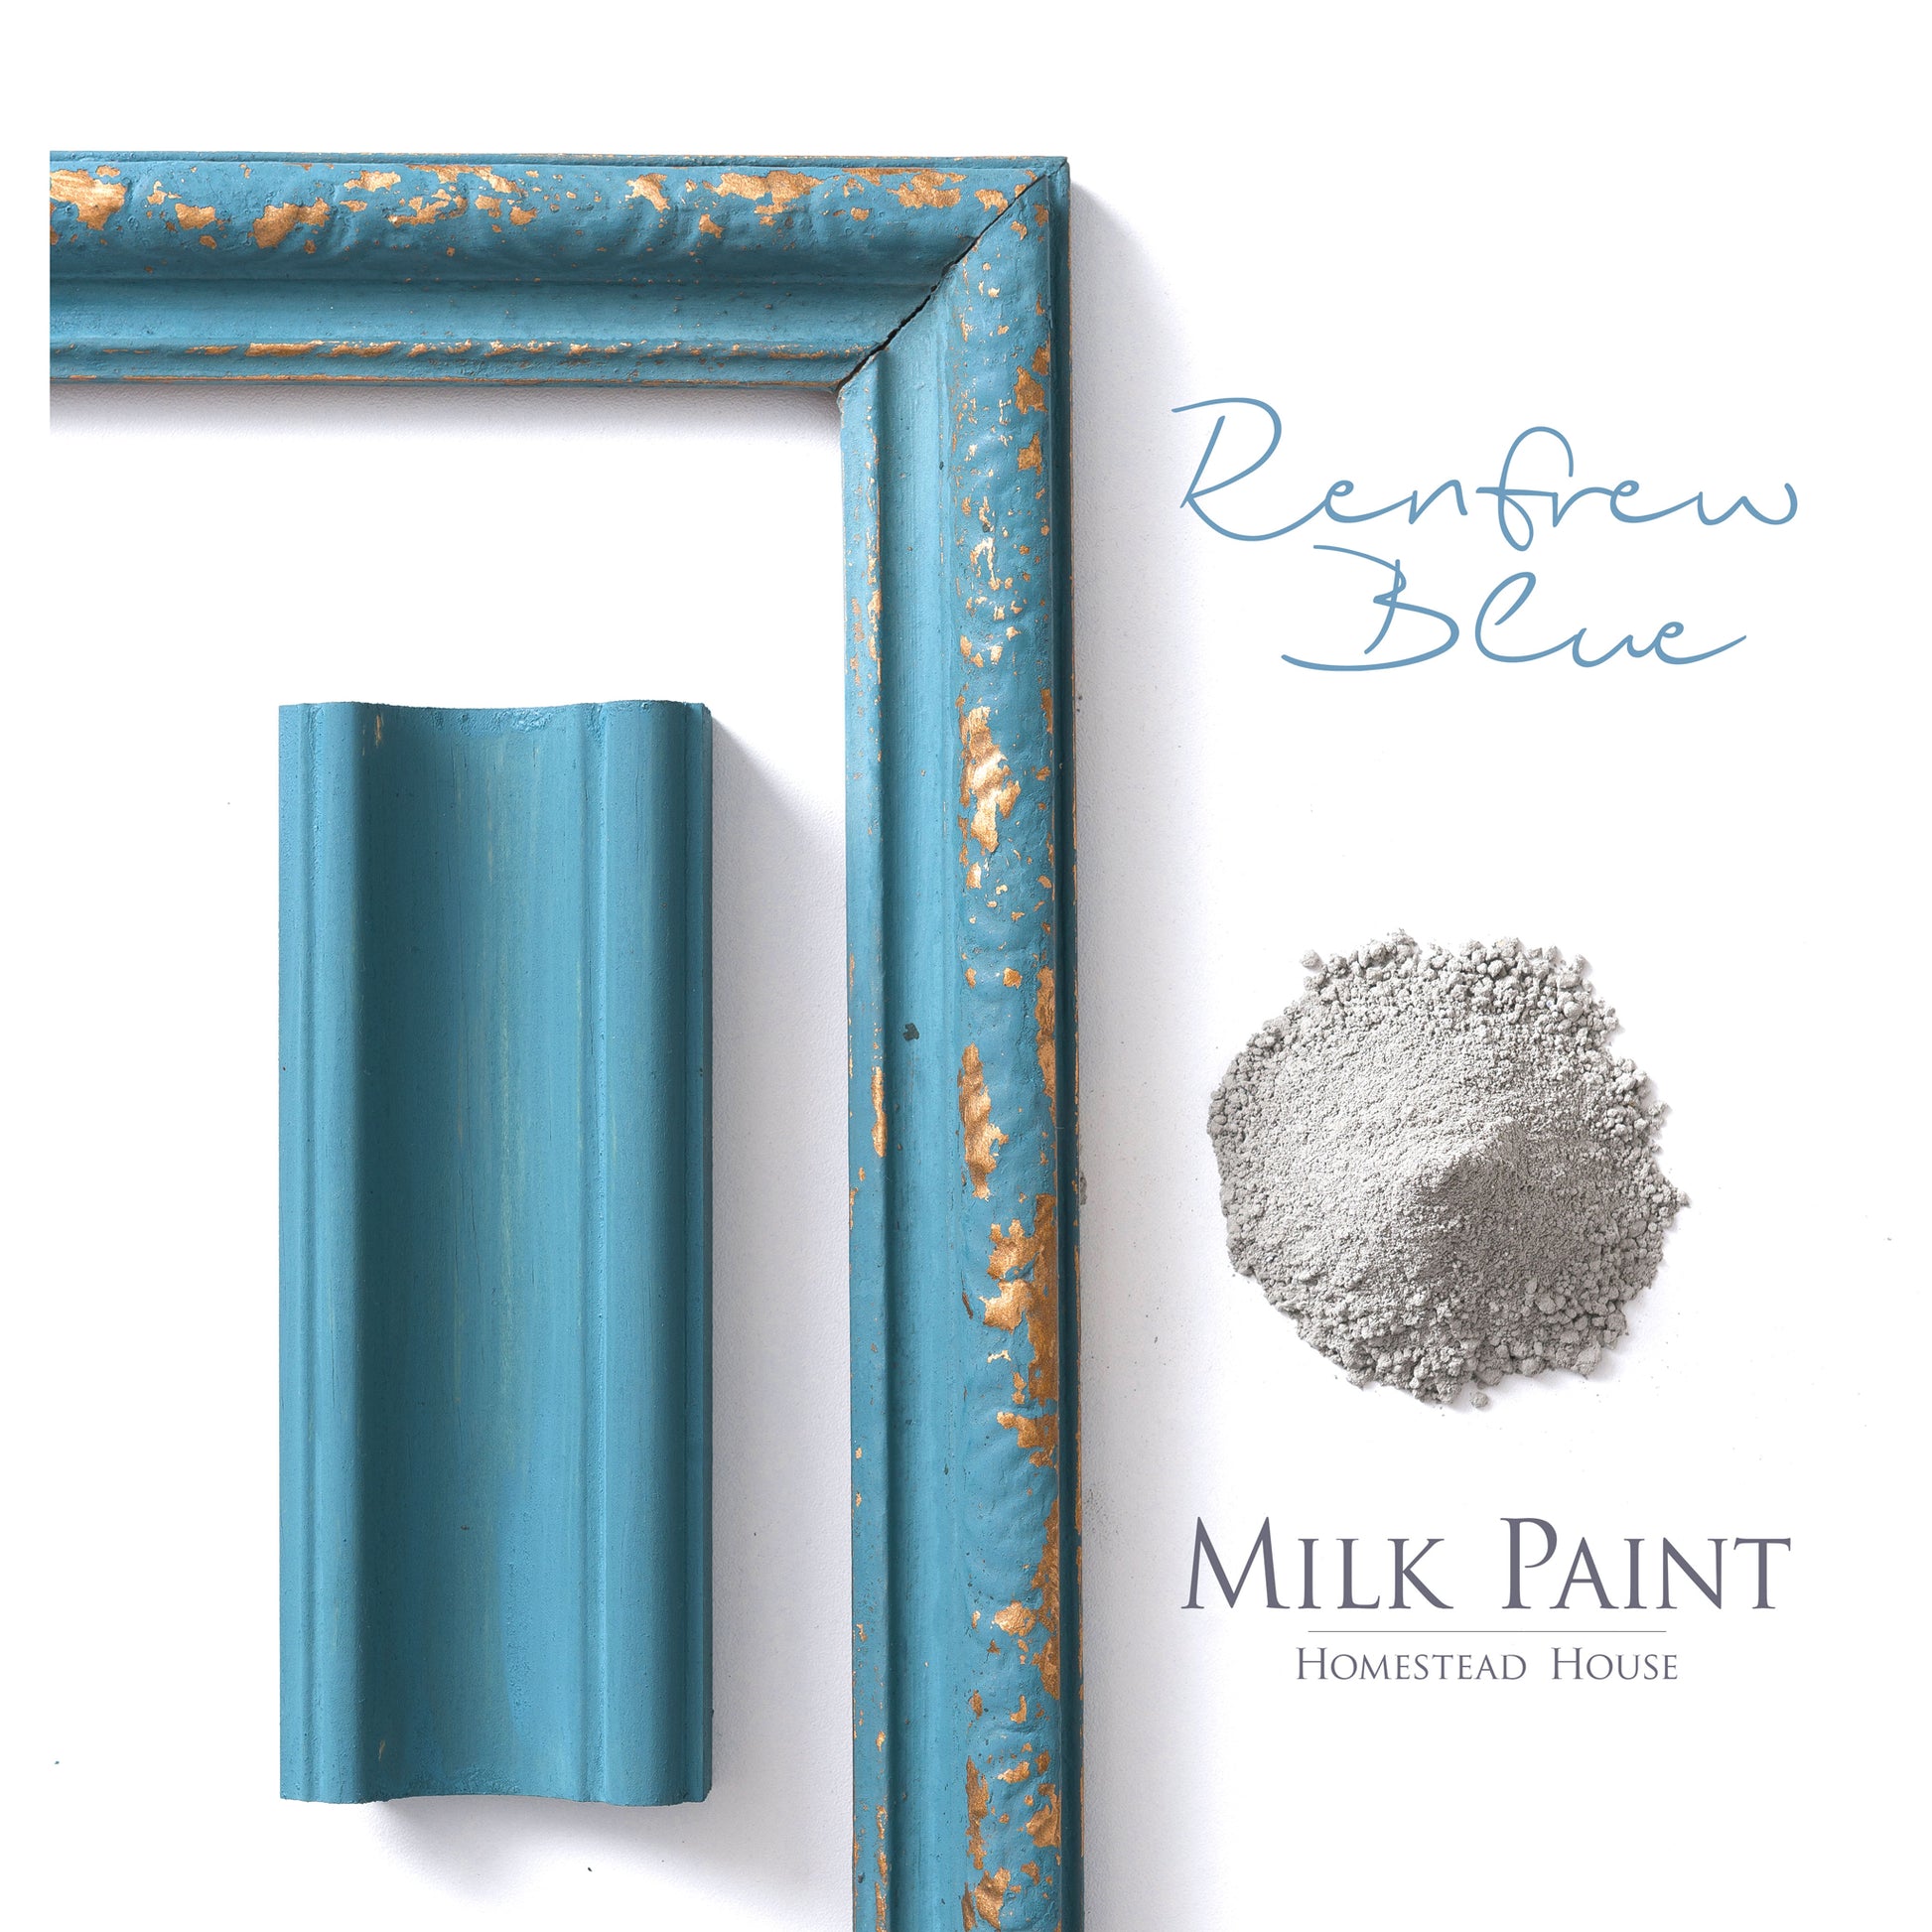 Milk Paint from Homestead House in Renfrew Blue - A muted dark turquoise blue . | homesteadhouse.ca